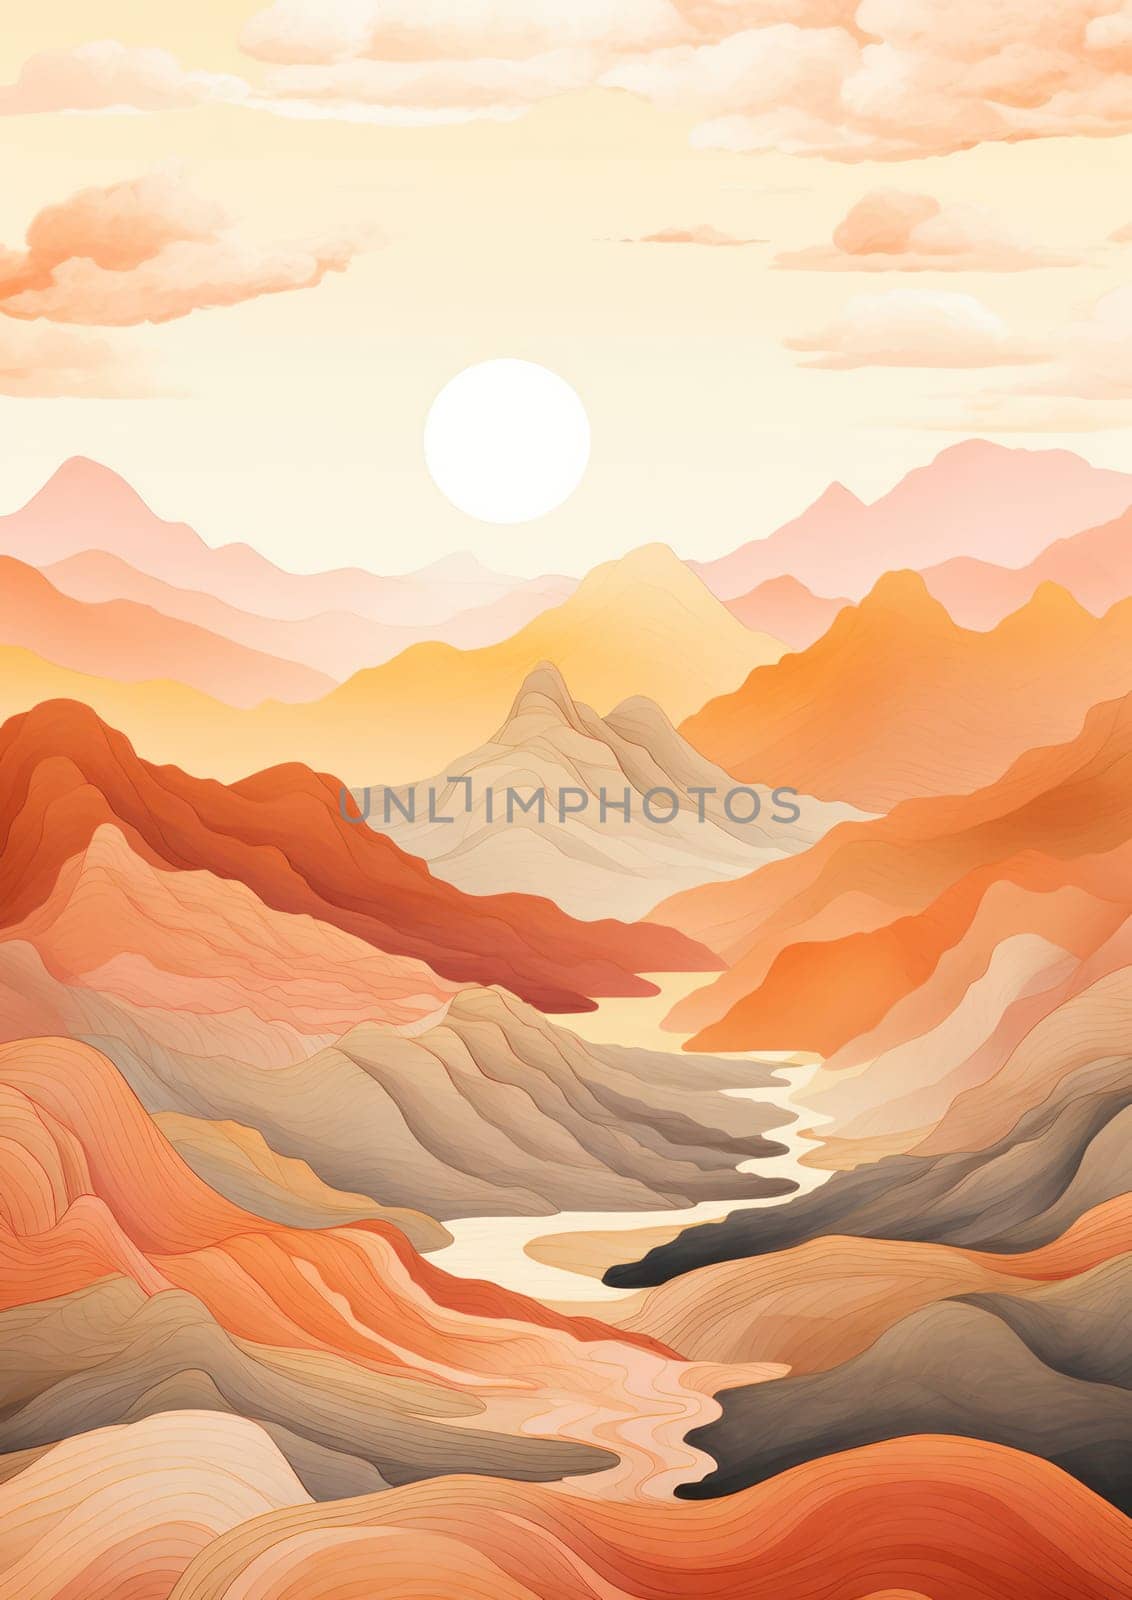 Sunrise Over Majestic Mountain Landscape: A Tranquil Morning Silhouette in the Wild